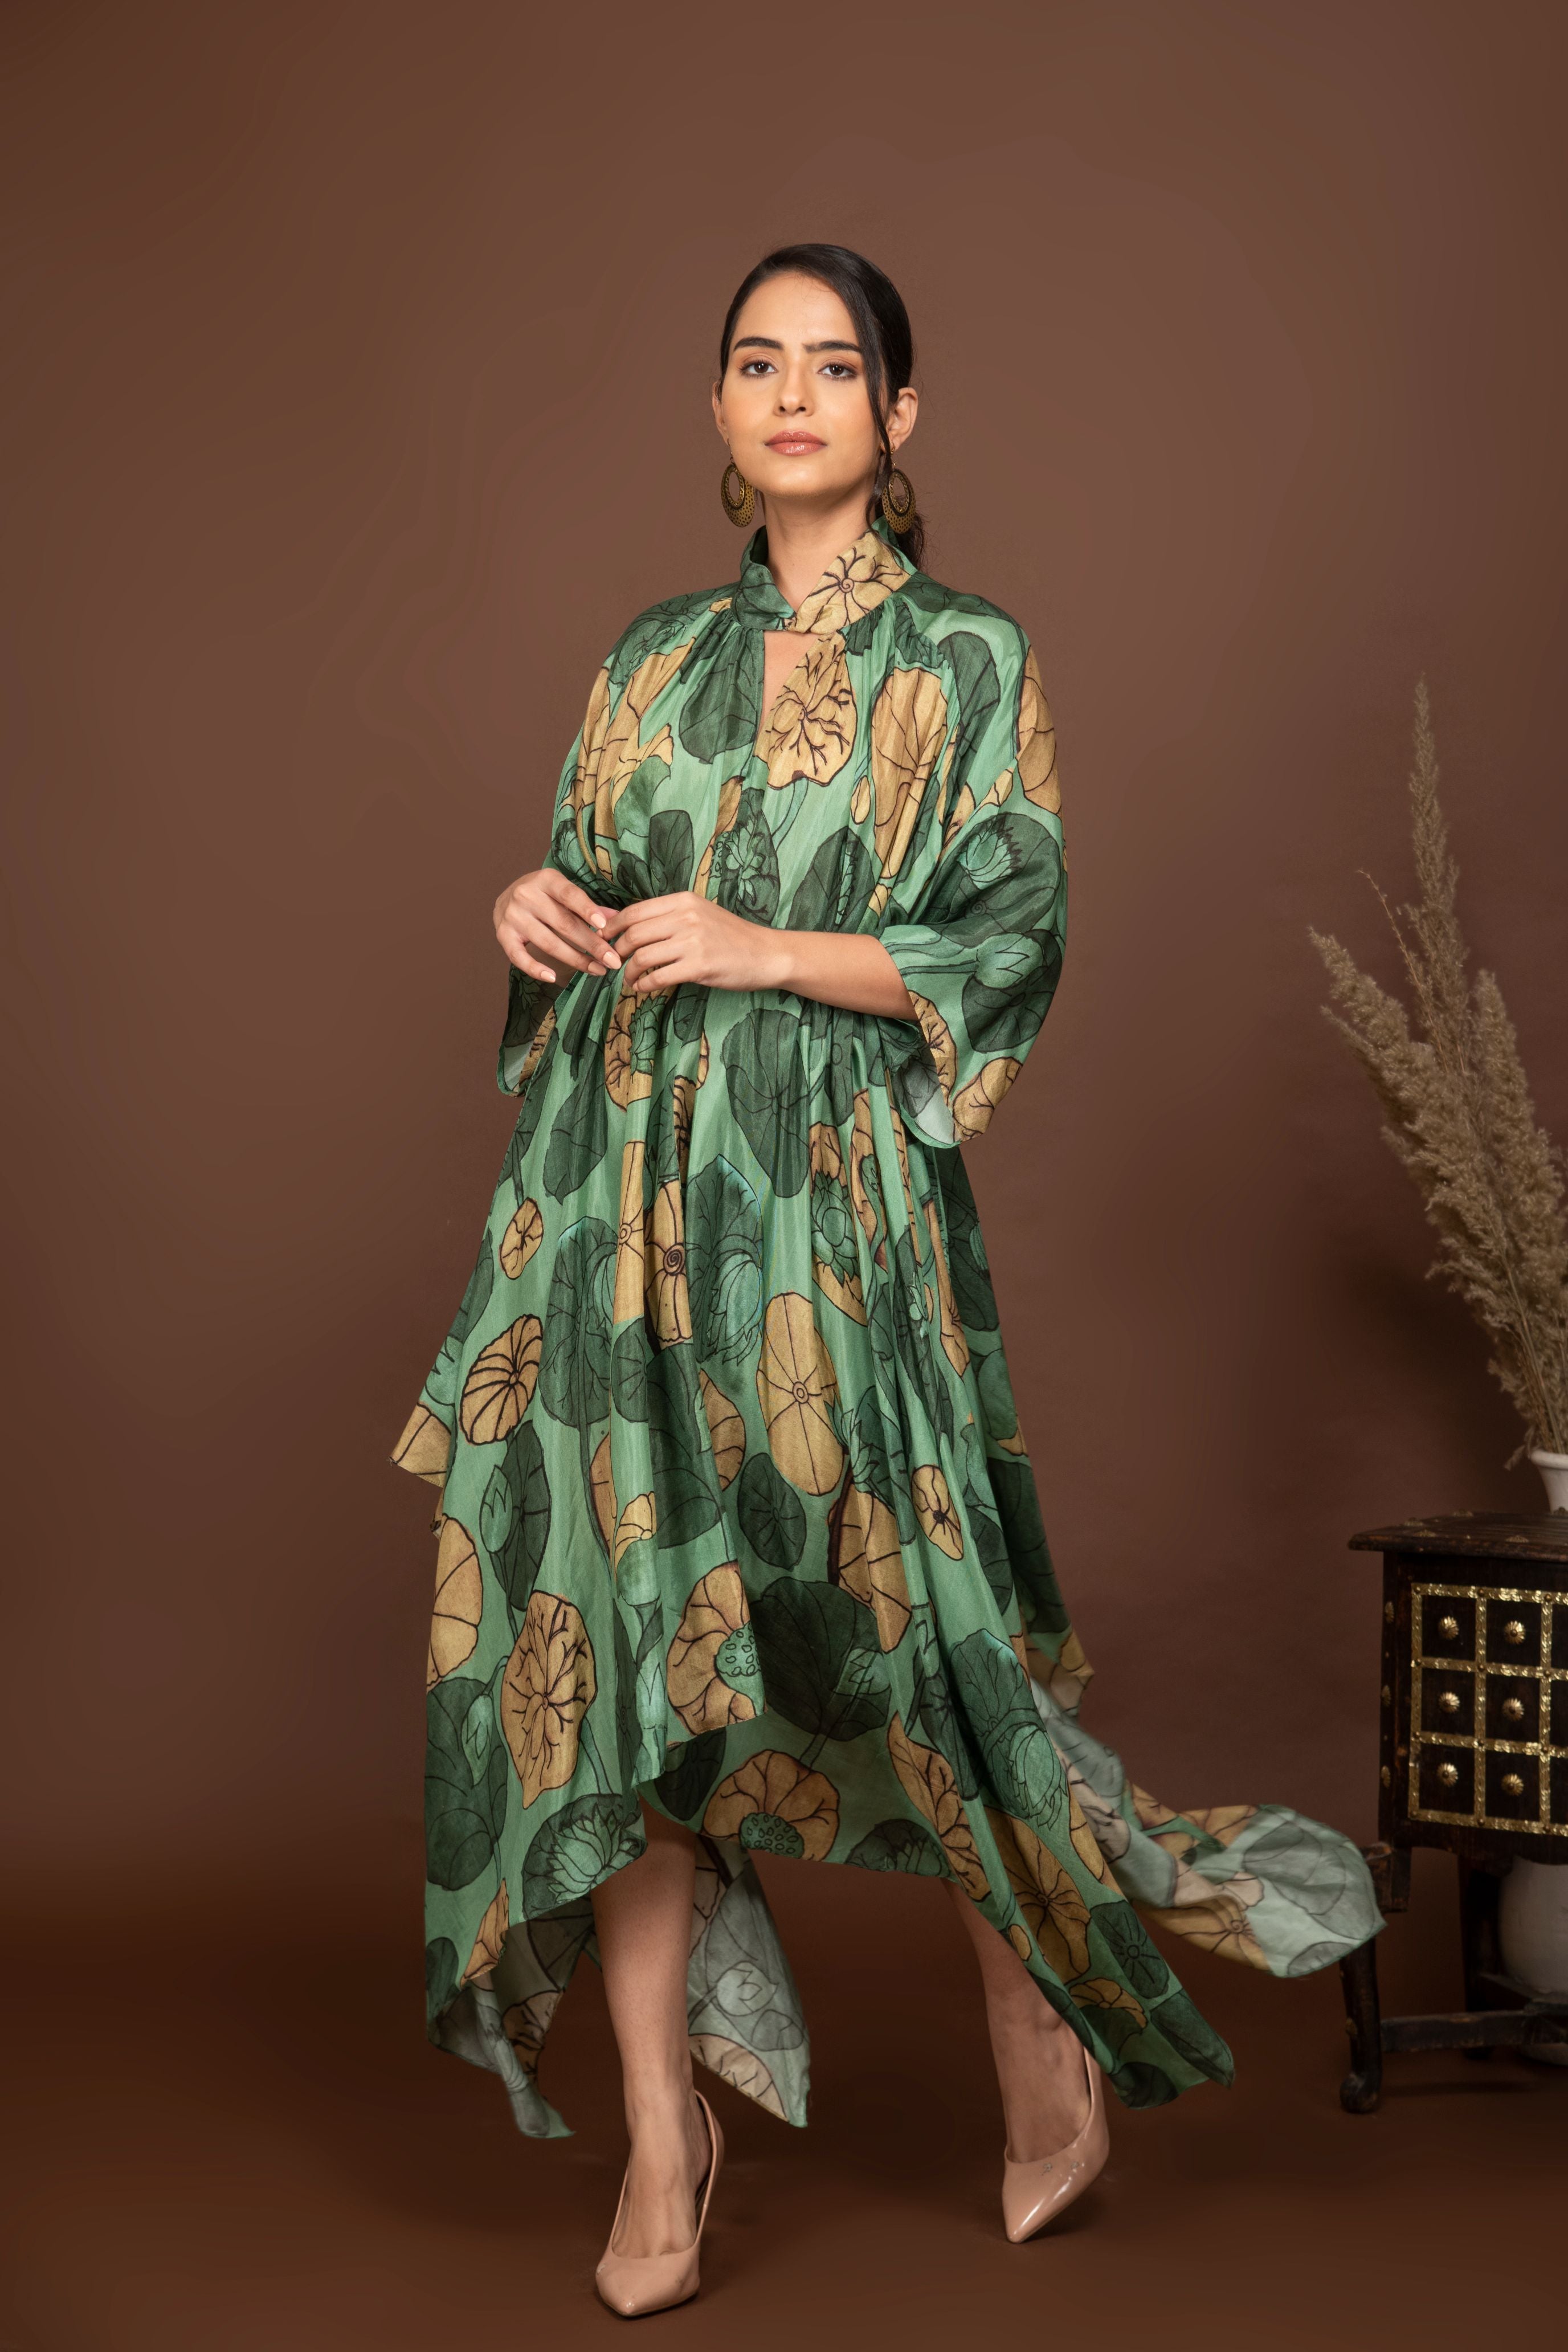 Teal green soft muslin bold prints high-low dress with tie up belt.